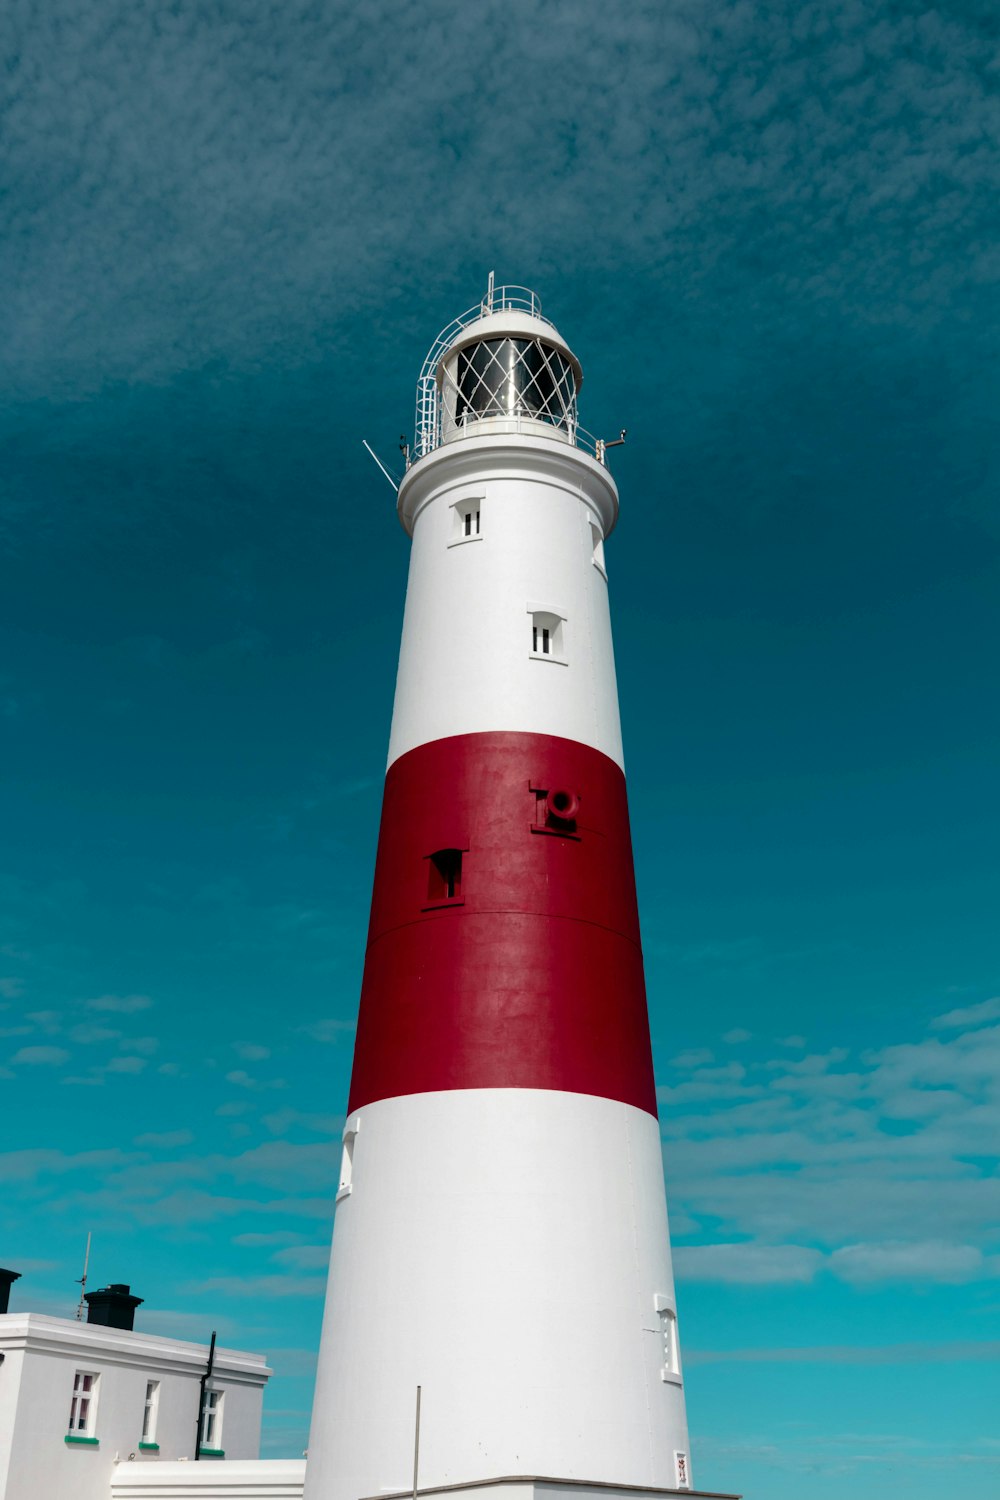 architectural photography of white and red lighthouse